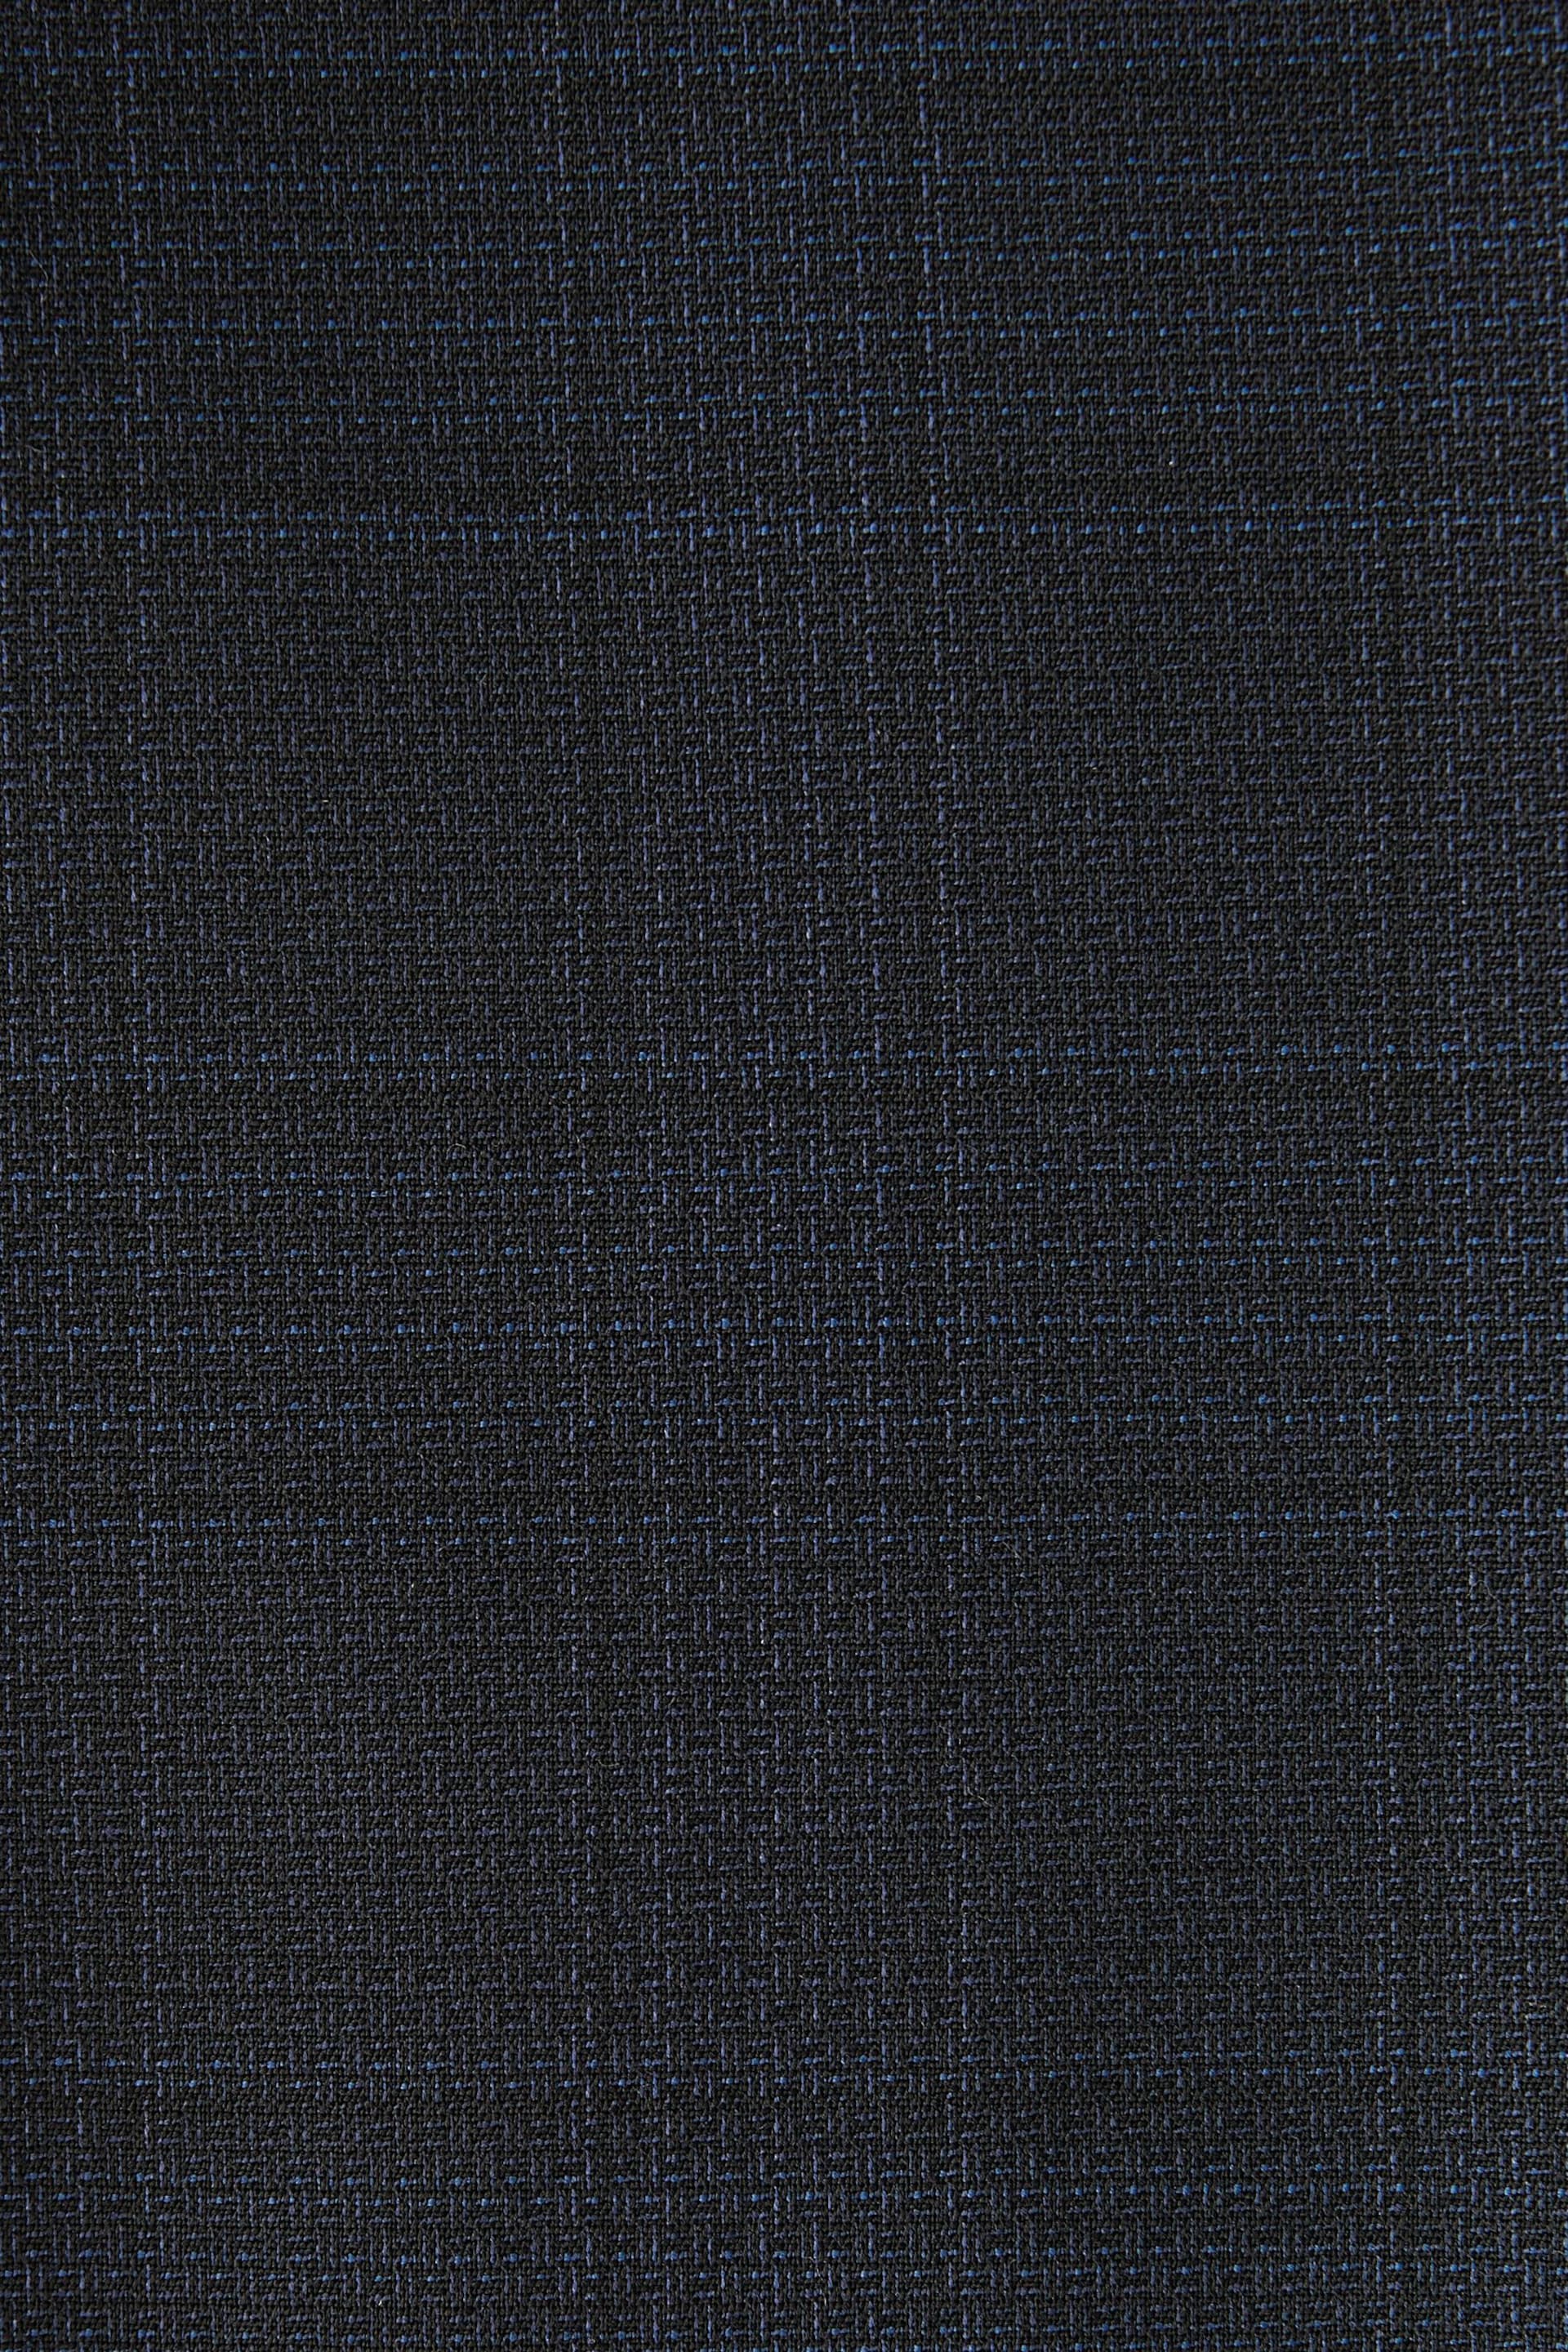 Navy Blue Signature Zignone Italian Fabric Check Suit Trousers - Image 8 of 10